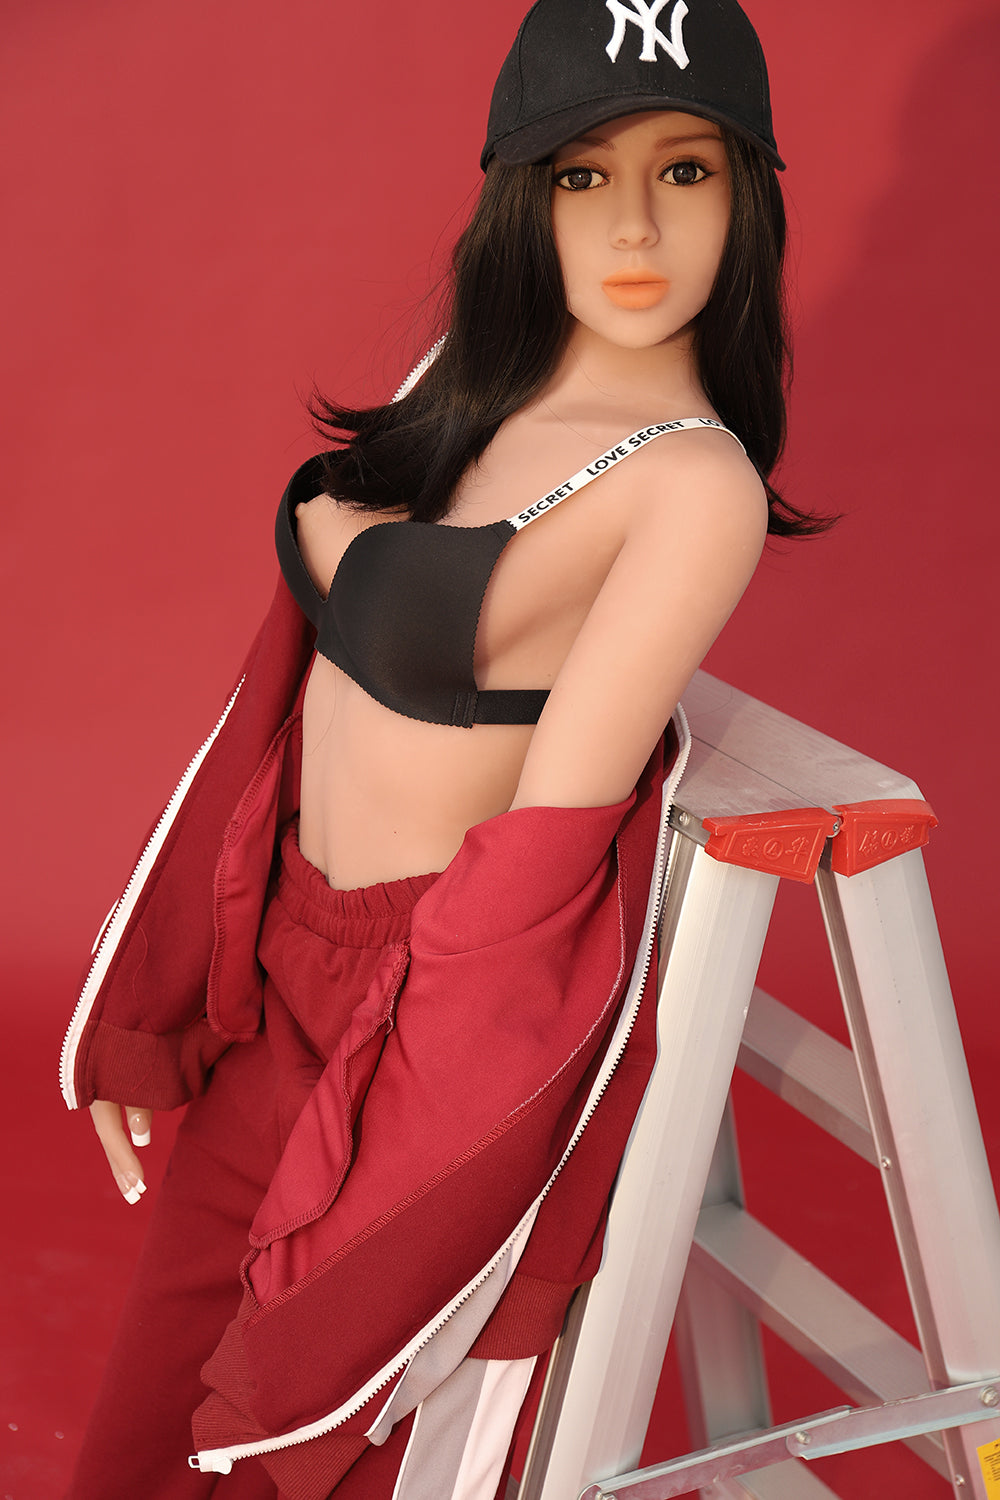 Kingmansion Spring 145cm A Cup Lifelike Young Sex Dolls for Men